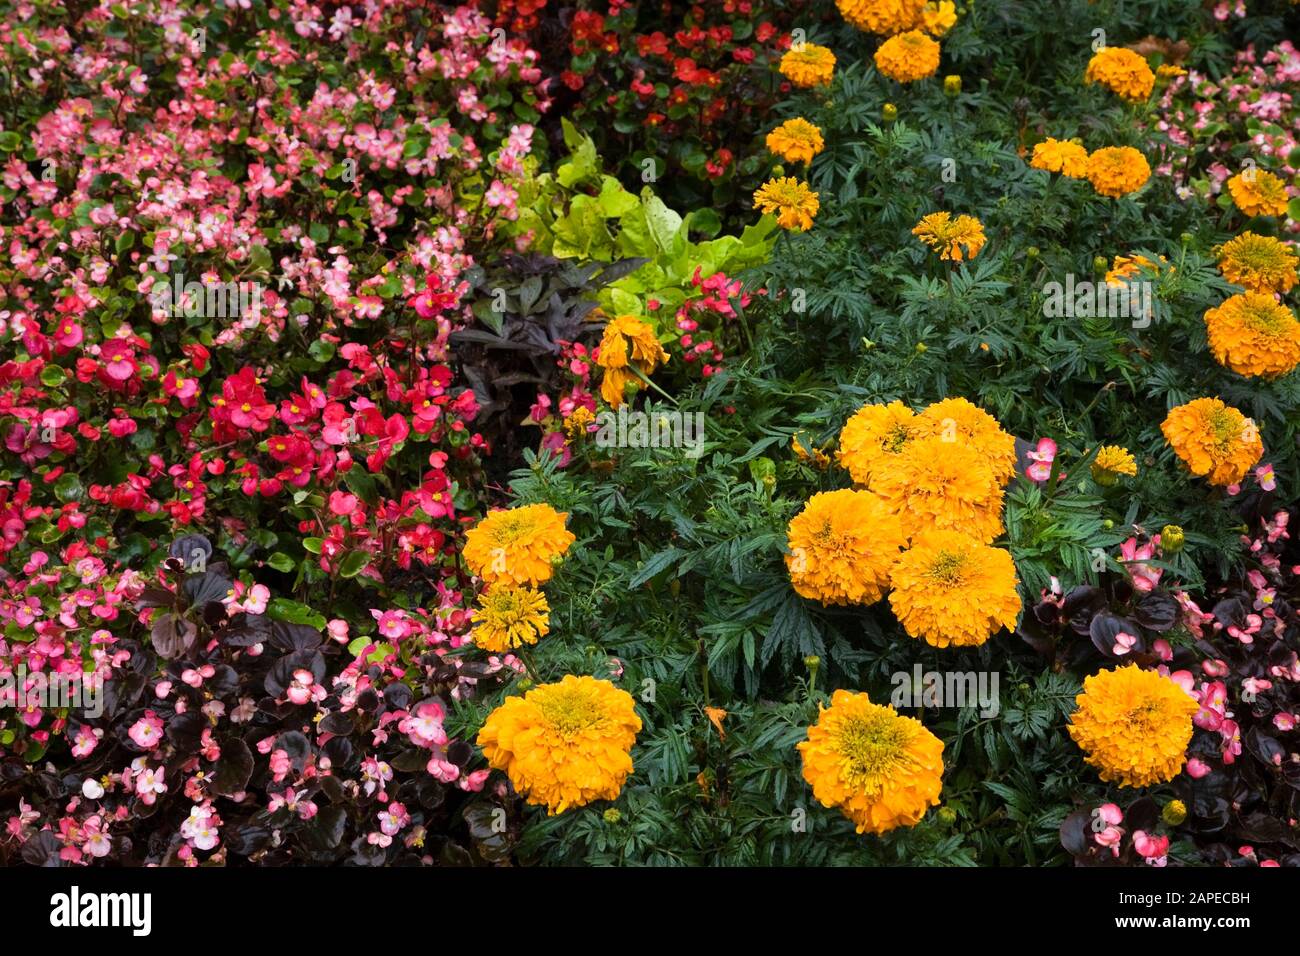 Pink and red Begonias and yellow Tagetes - Marigold flowers in public park garden border Stock Photo